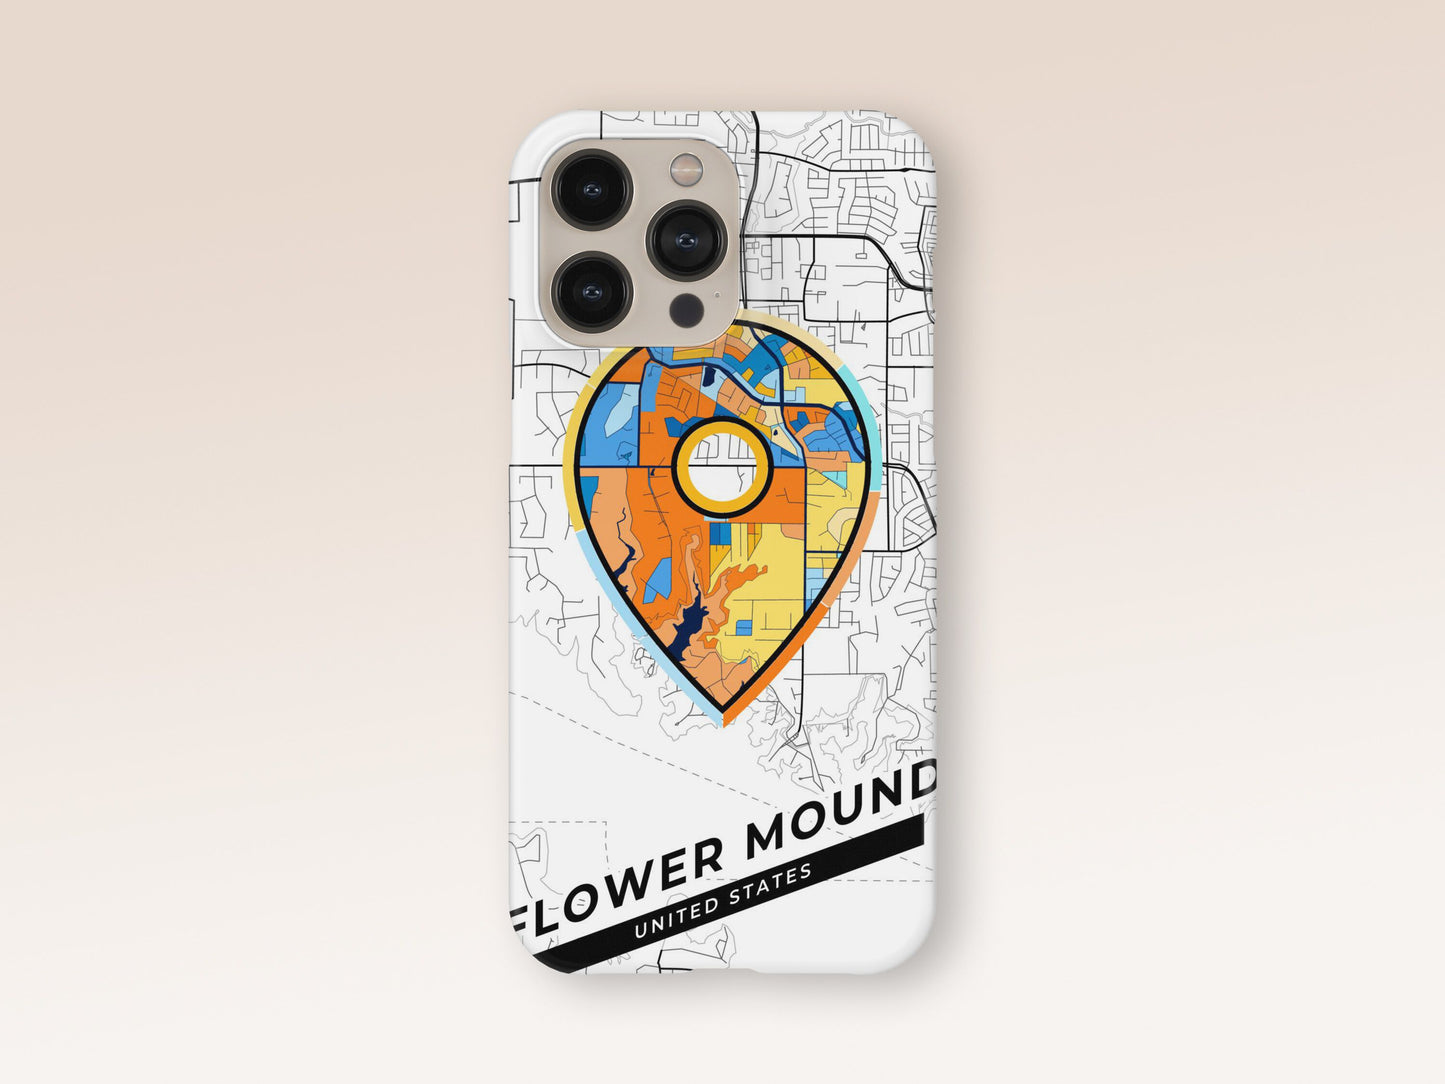 Flower Mound Texas slim phone case with colorful icon. Birthday, wedding or housewarming gift. Couple match cases. 1